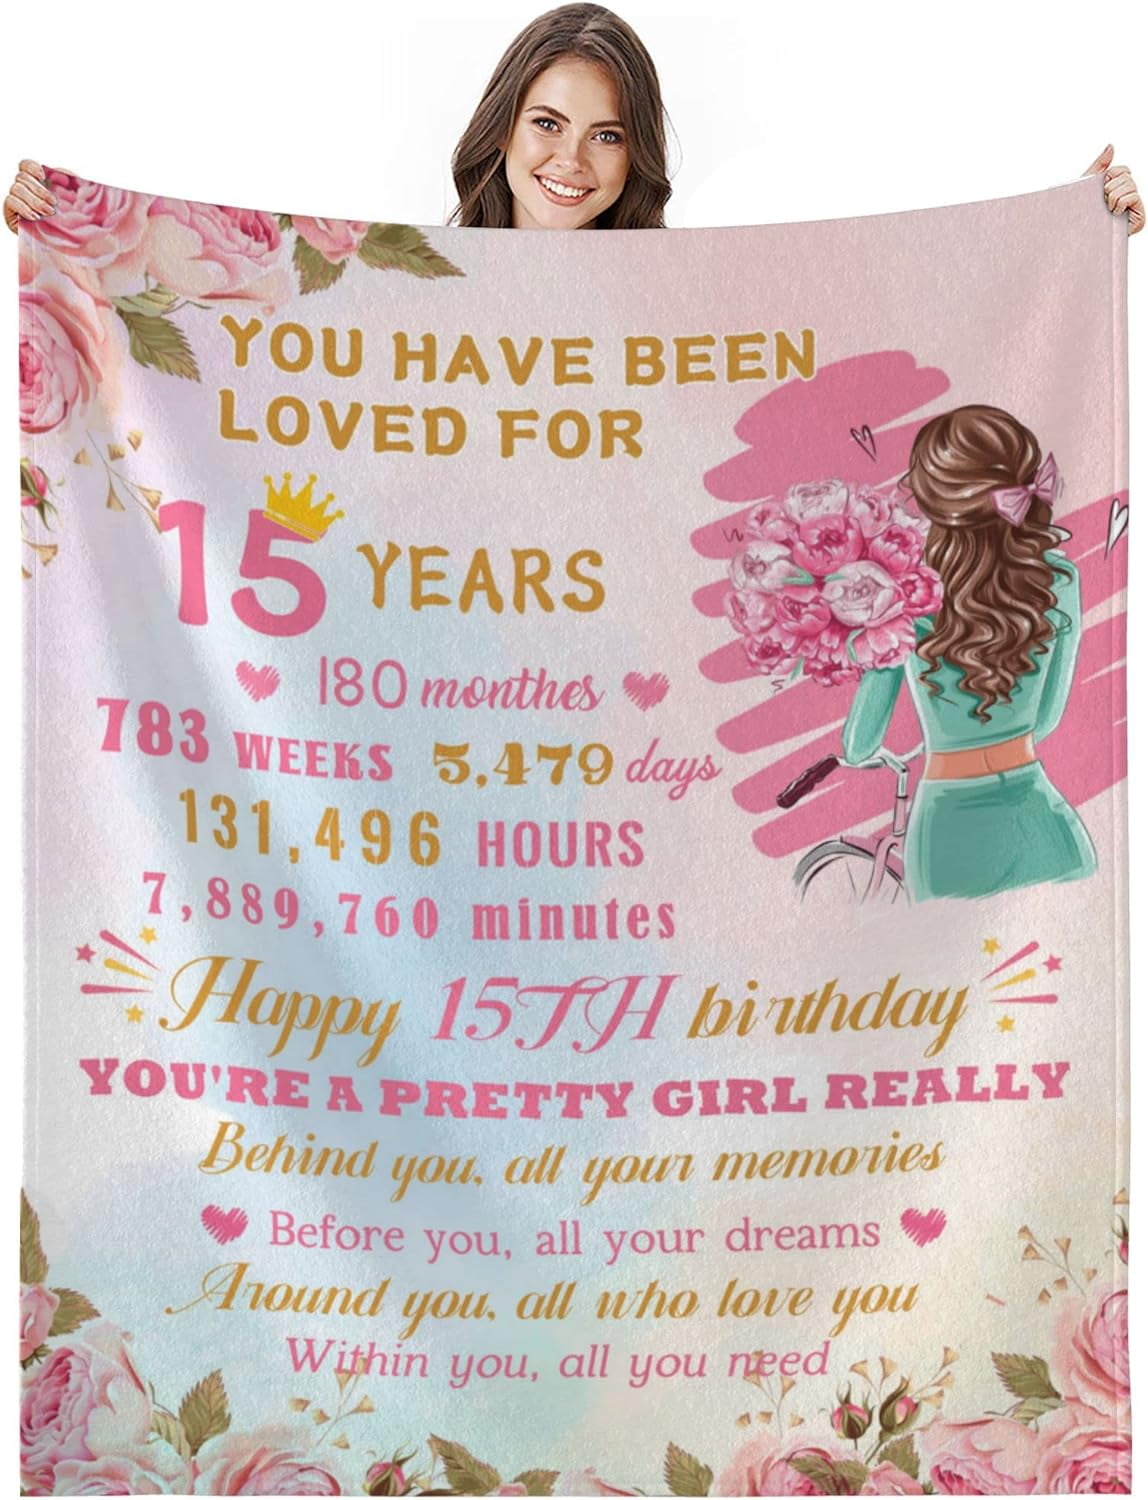 RooRuns 17th Birthday Gifts for Girls - Best Gifts for 17 Year Old